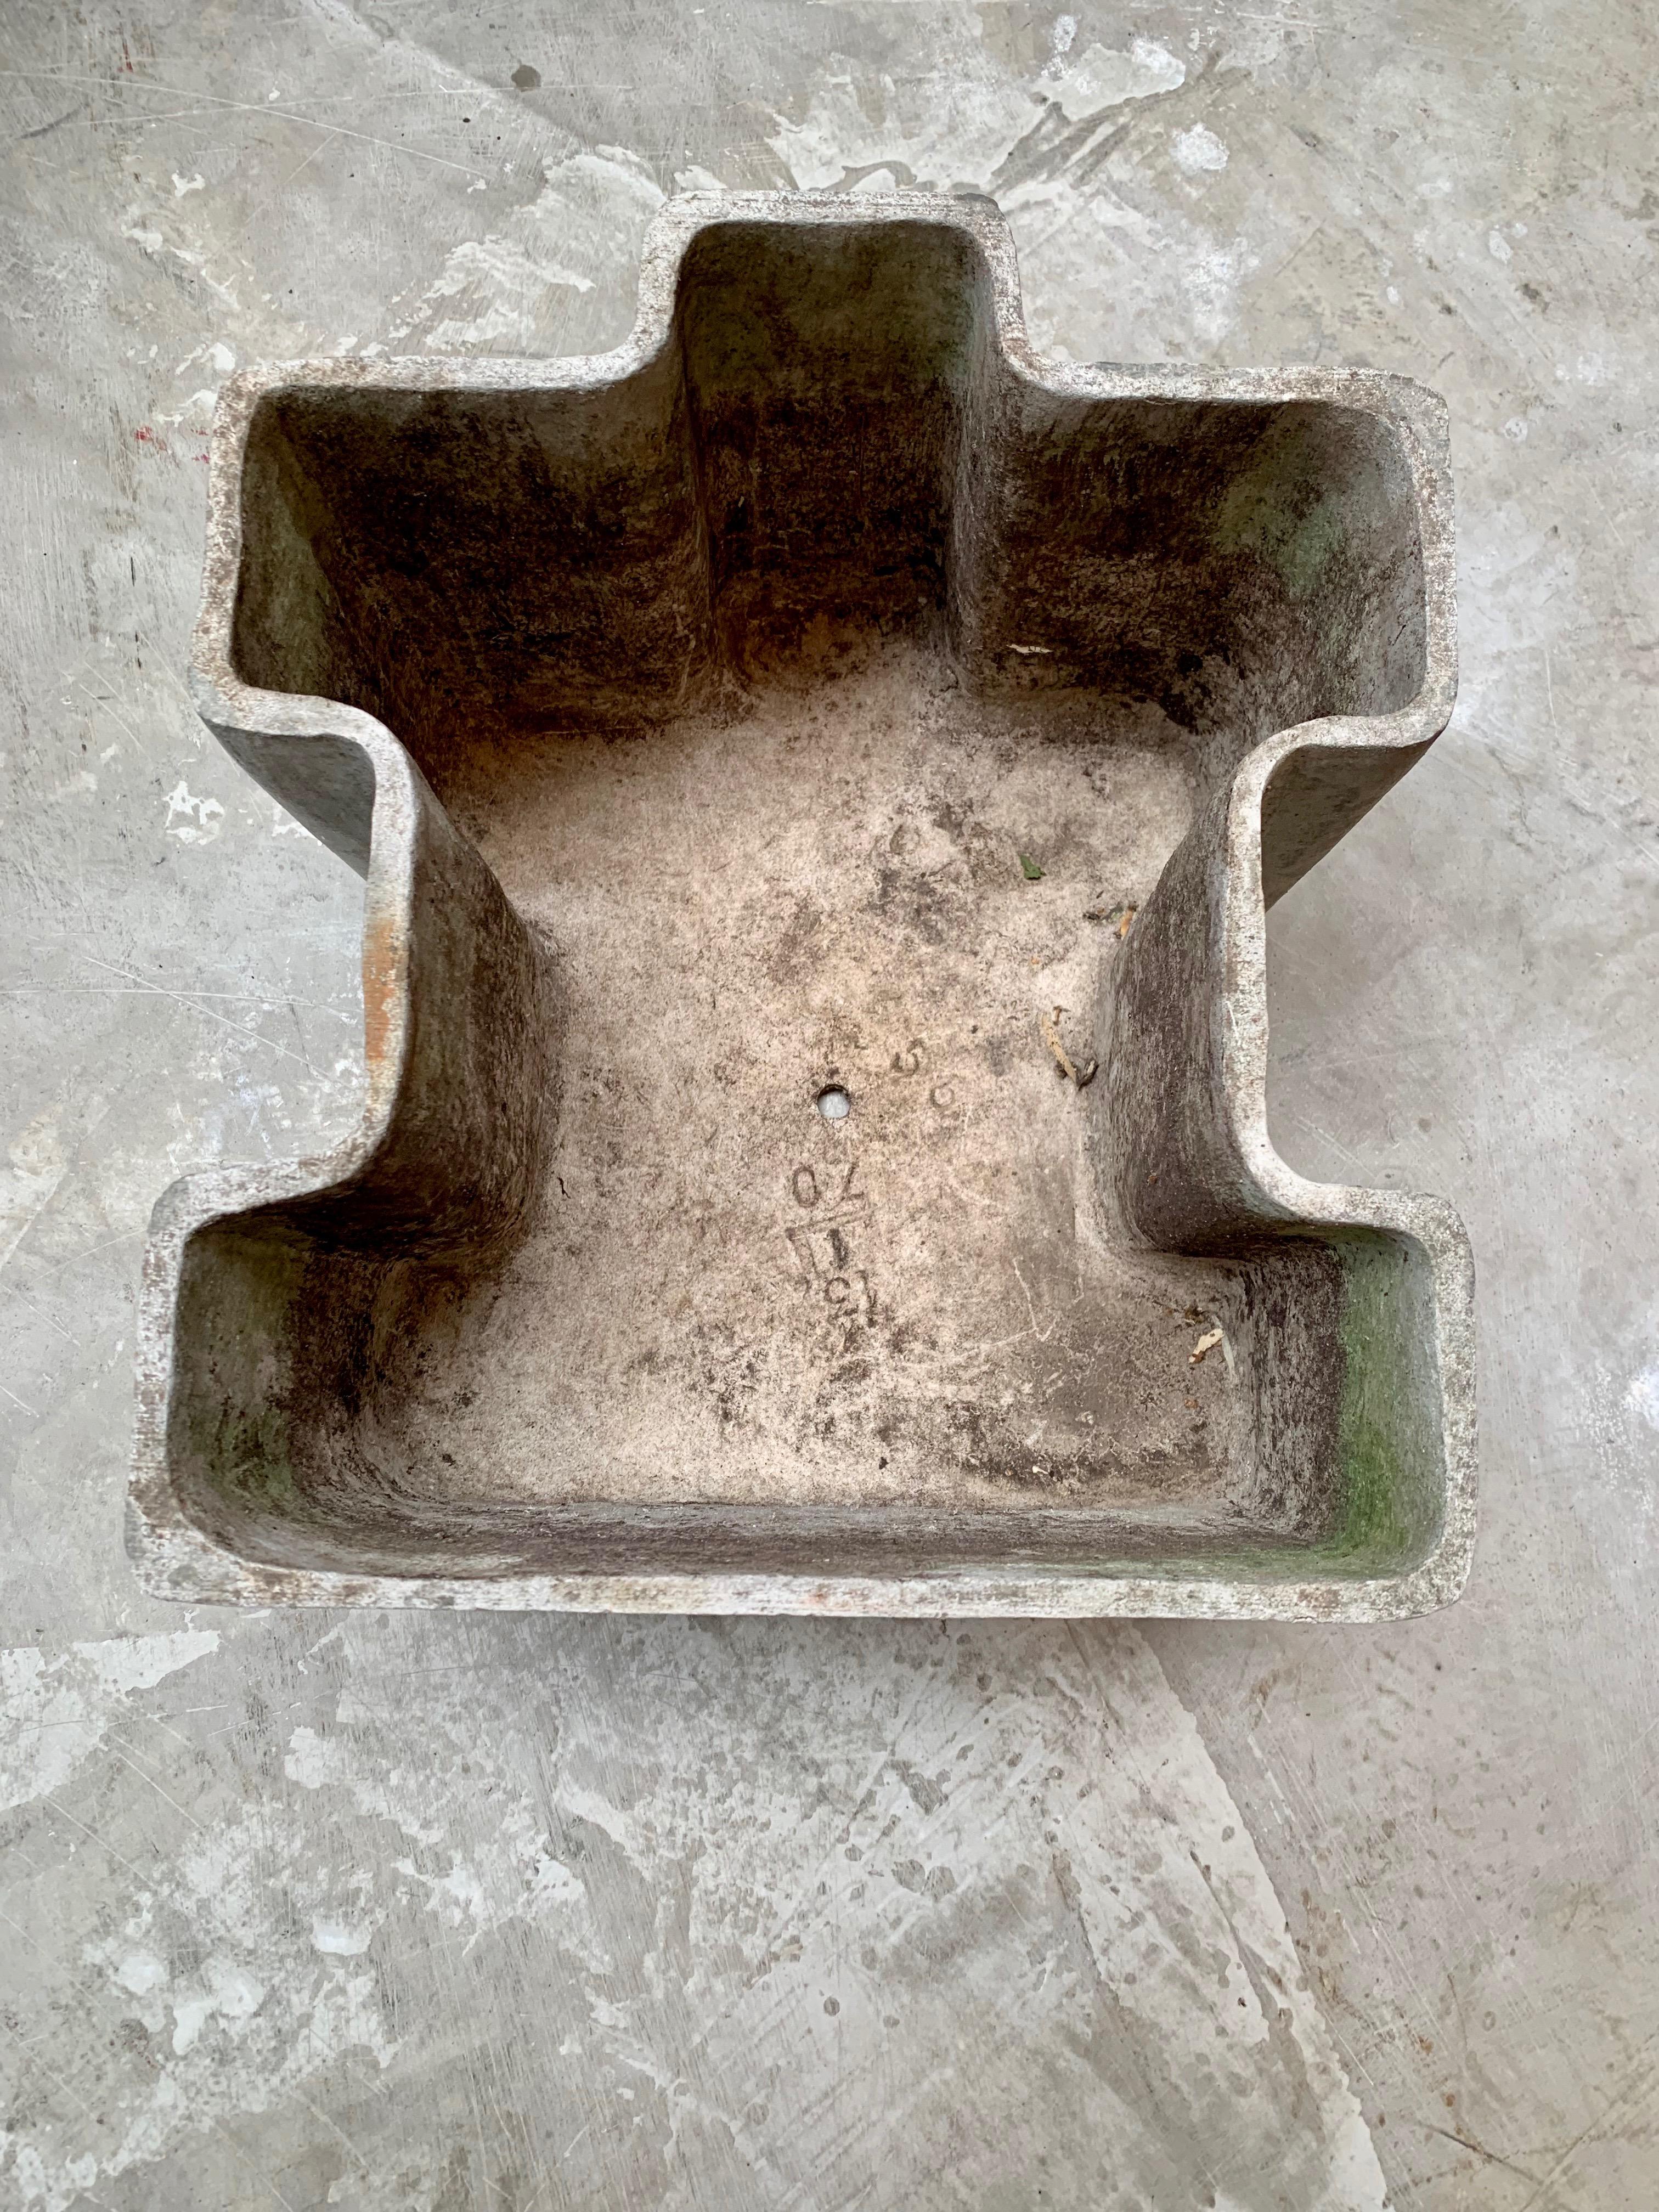 Fantastic piece of sculpture by Swiss architect Willy Guhl. Original patina concrete planter in the shape of a jigsaw puzzle piece. Cool sculptural piece for indoors or outside. Great standalone piece of art. Excellent vintage